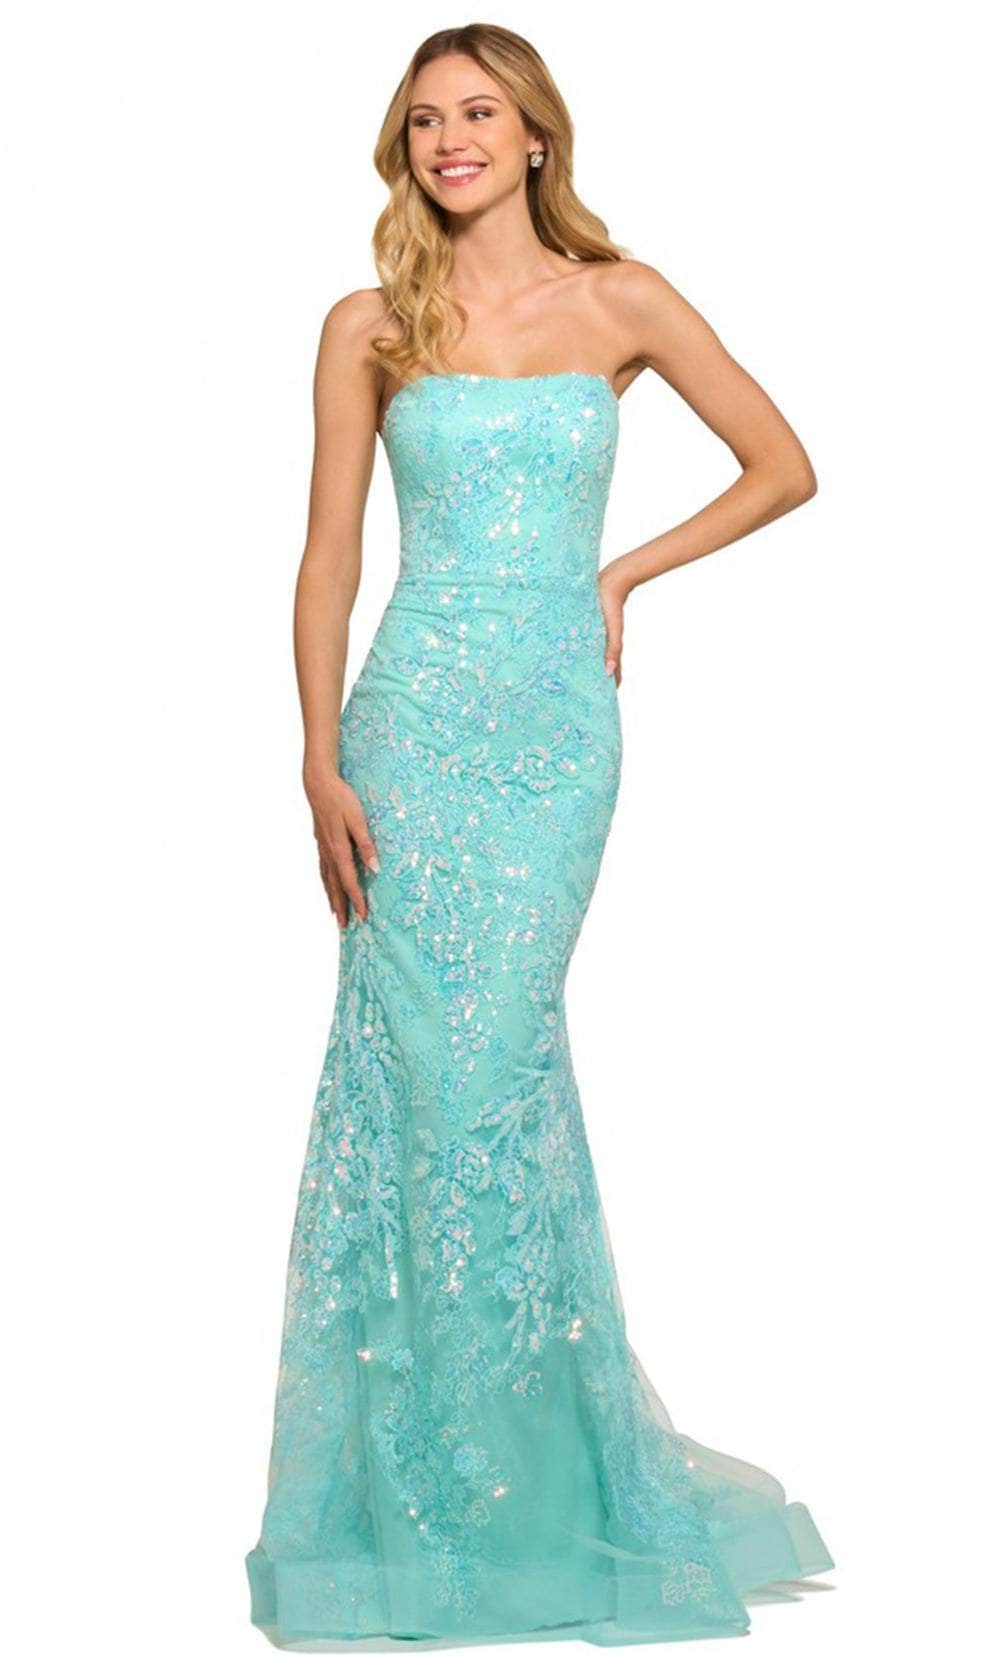 Image of Sherri Hill 55501 - Sequin Embellished Strapless Prom Gown